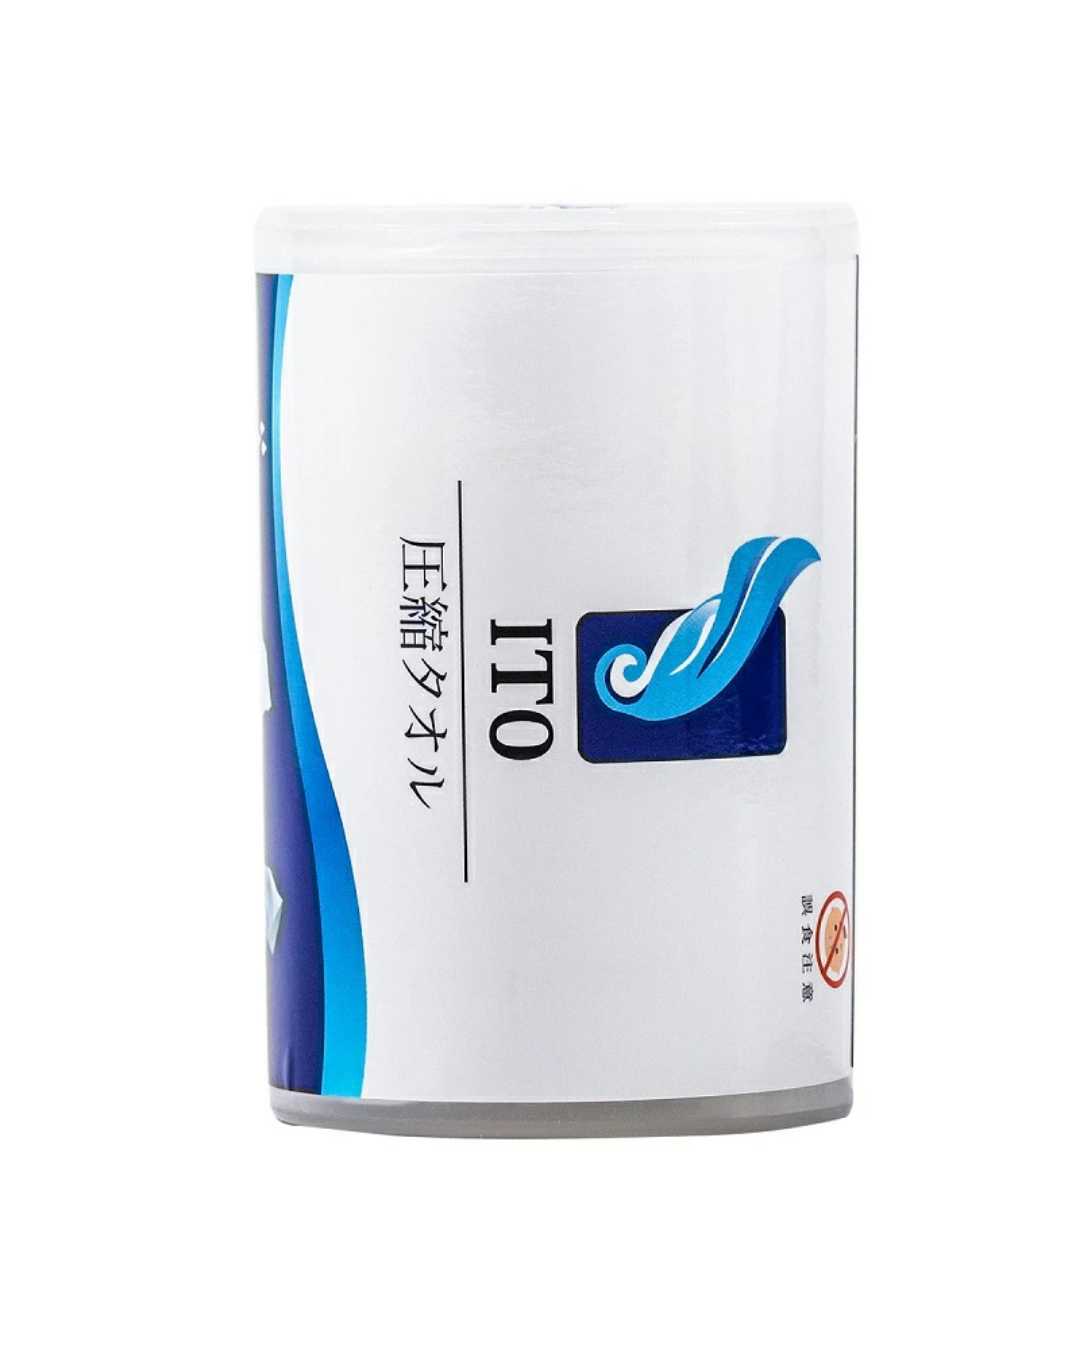 ITO Compressed Towel